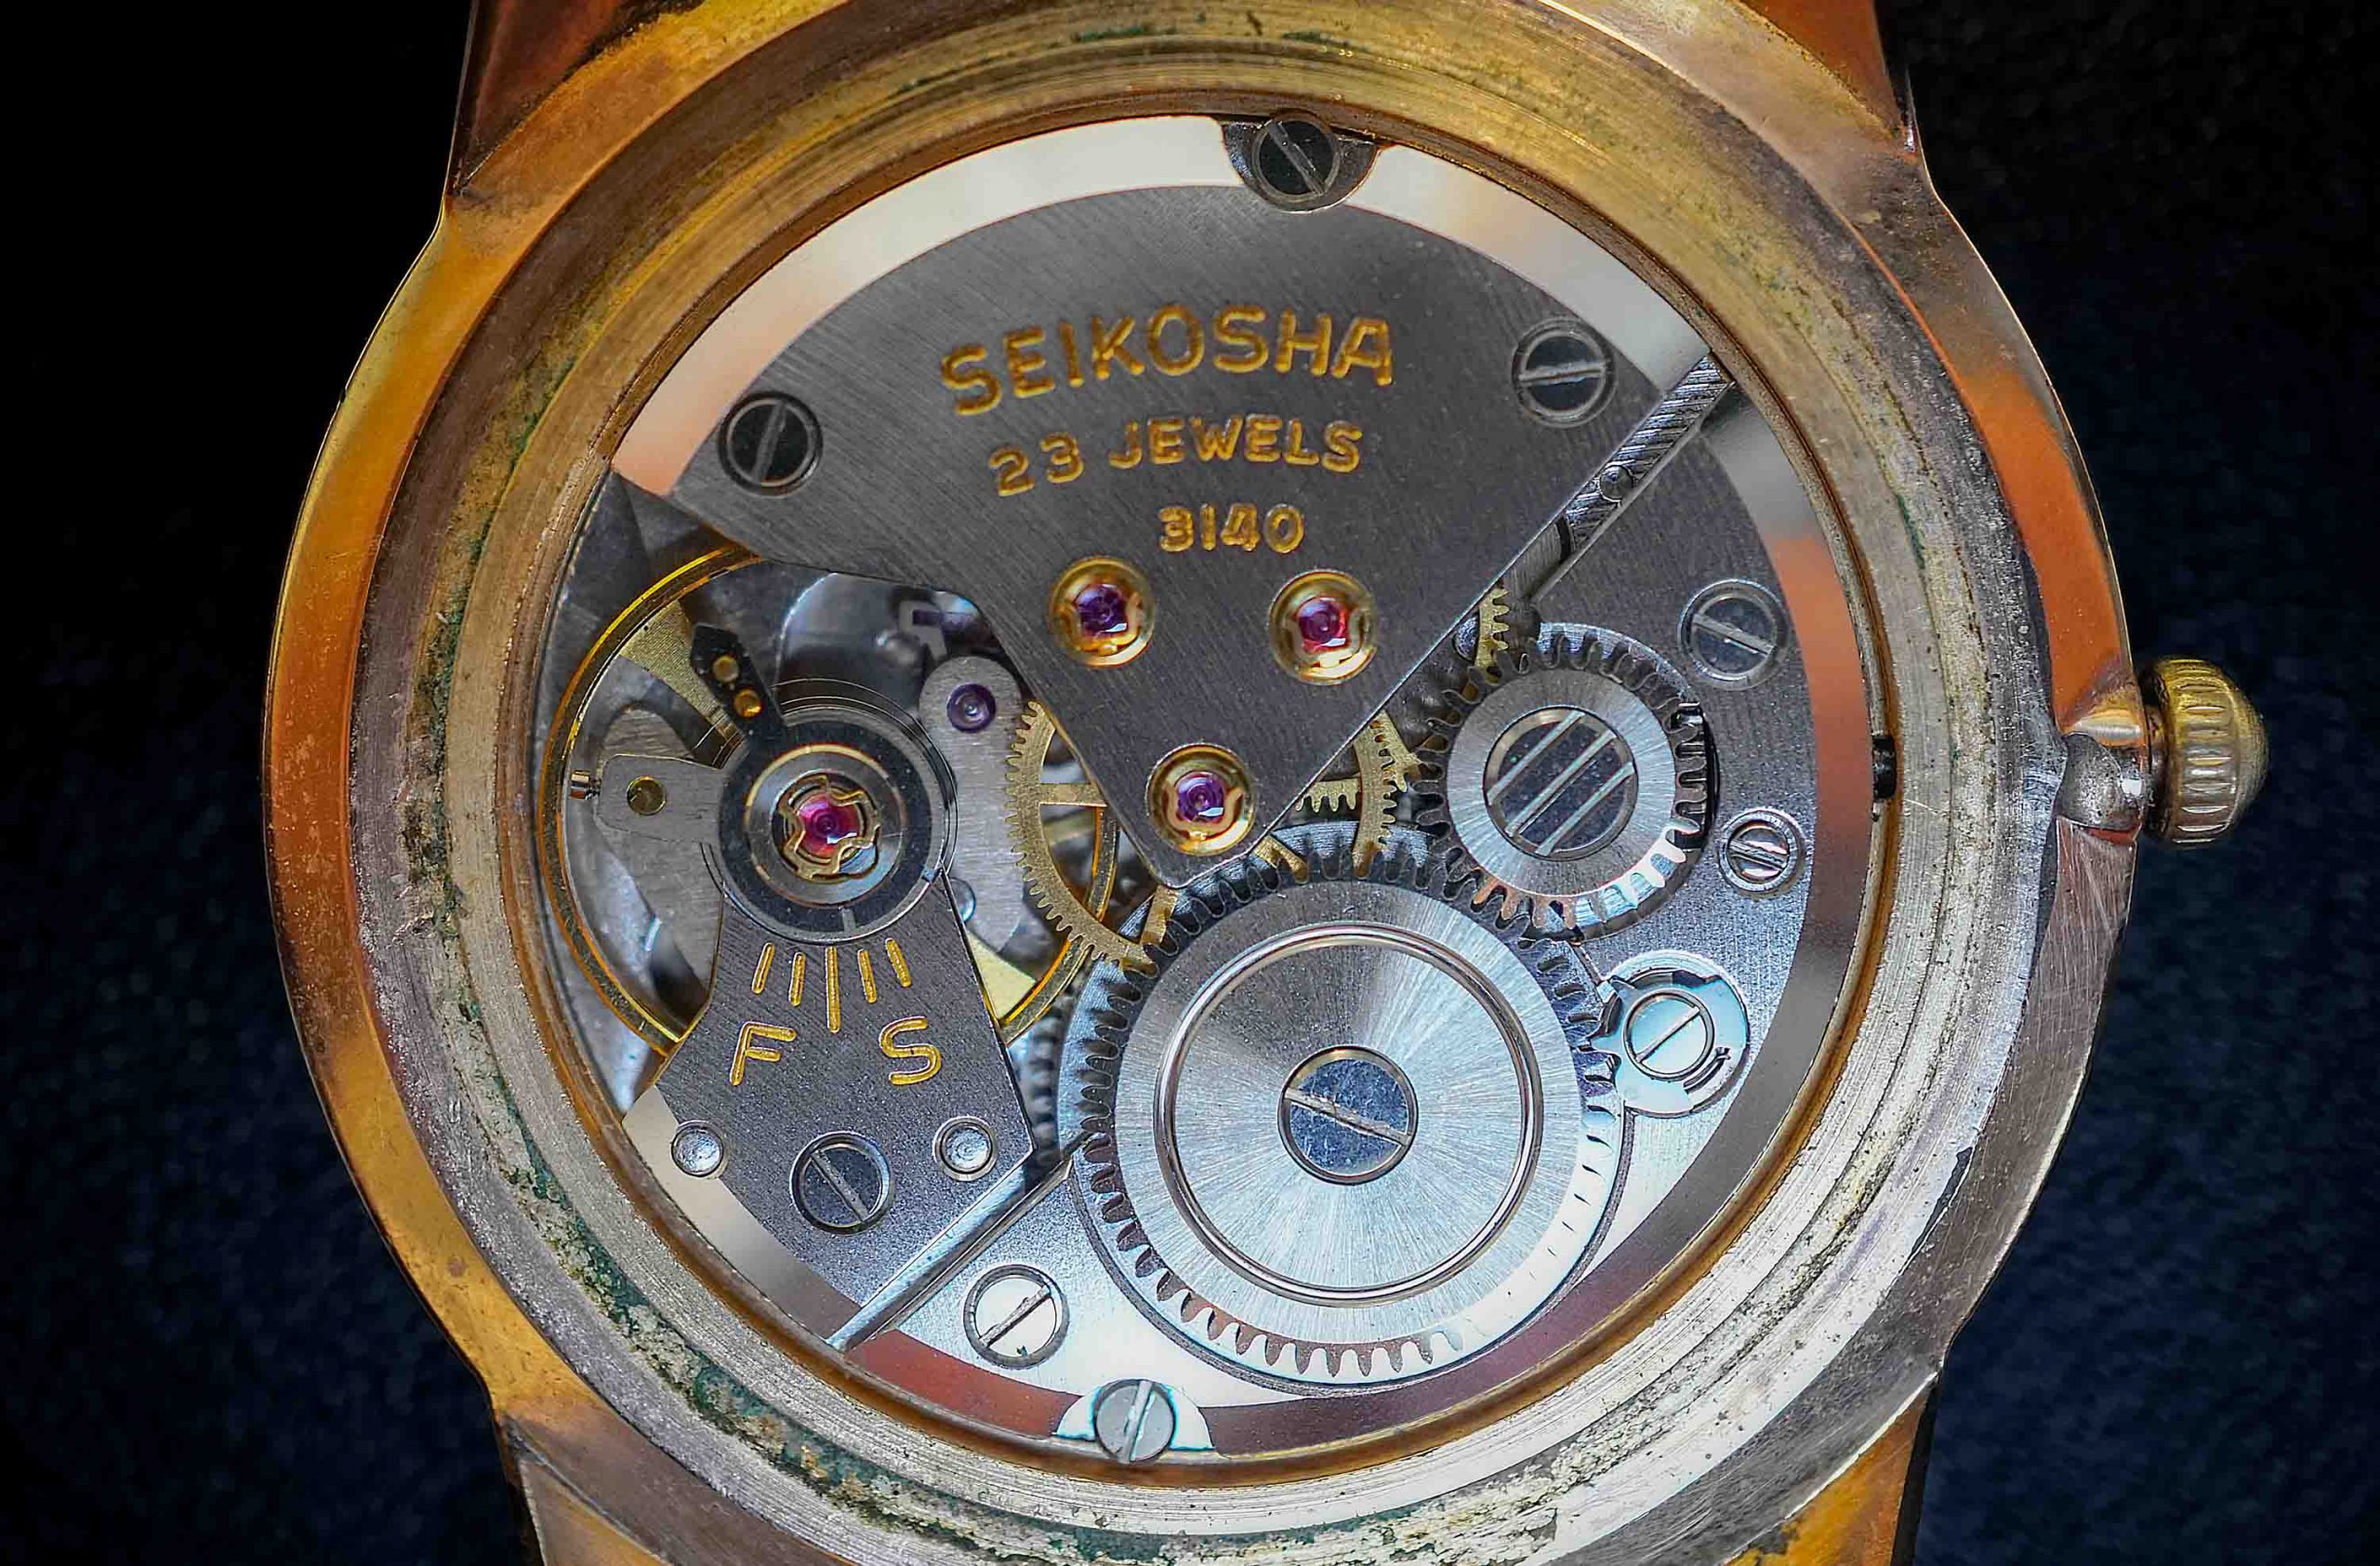 3mm thick caliber 3140 used in the non chronometer Seiko Liners